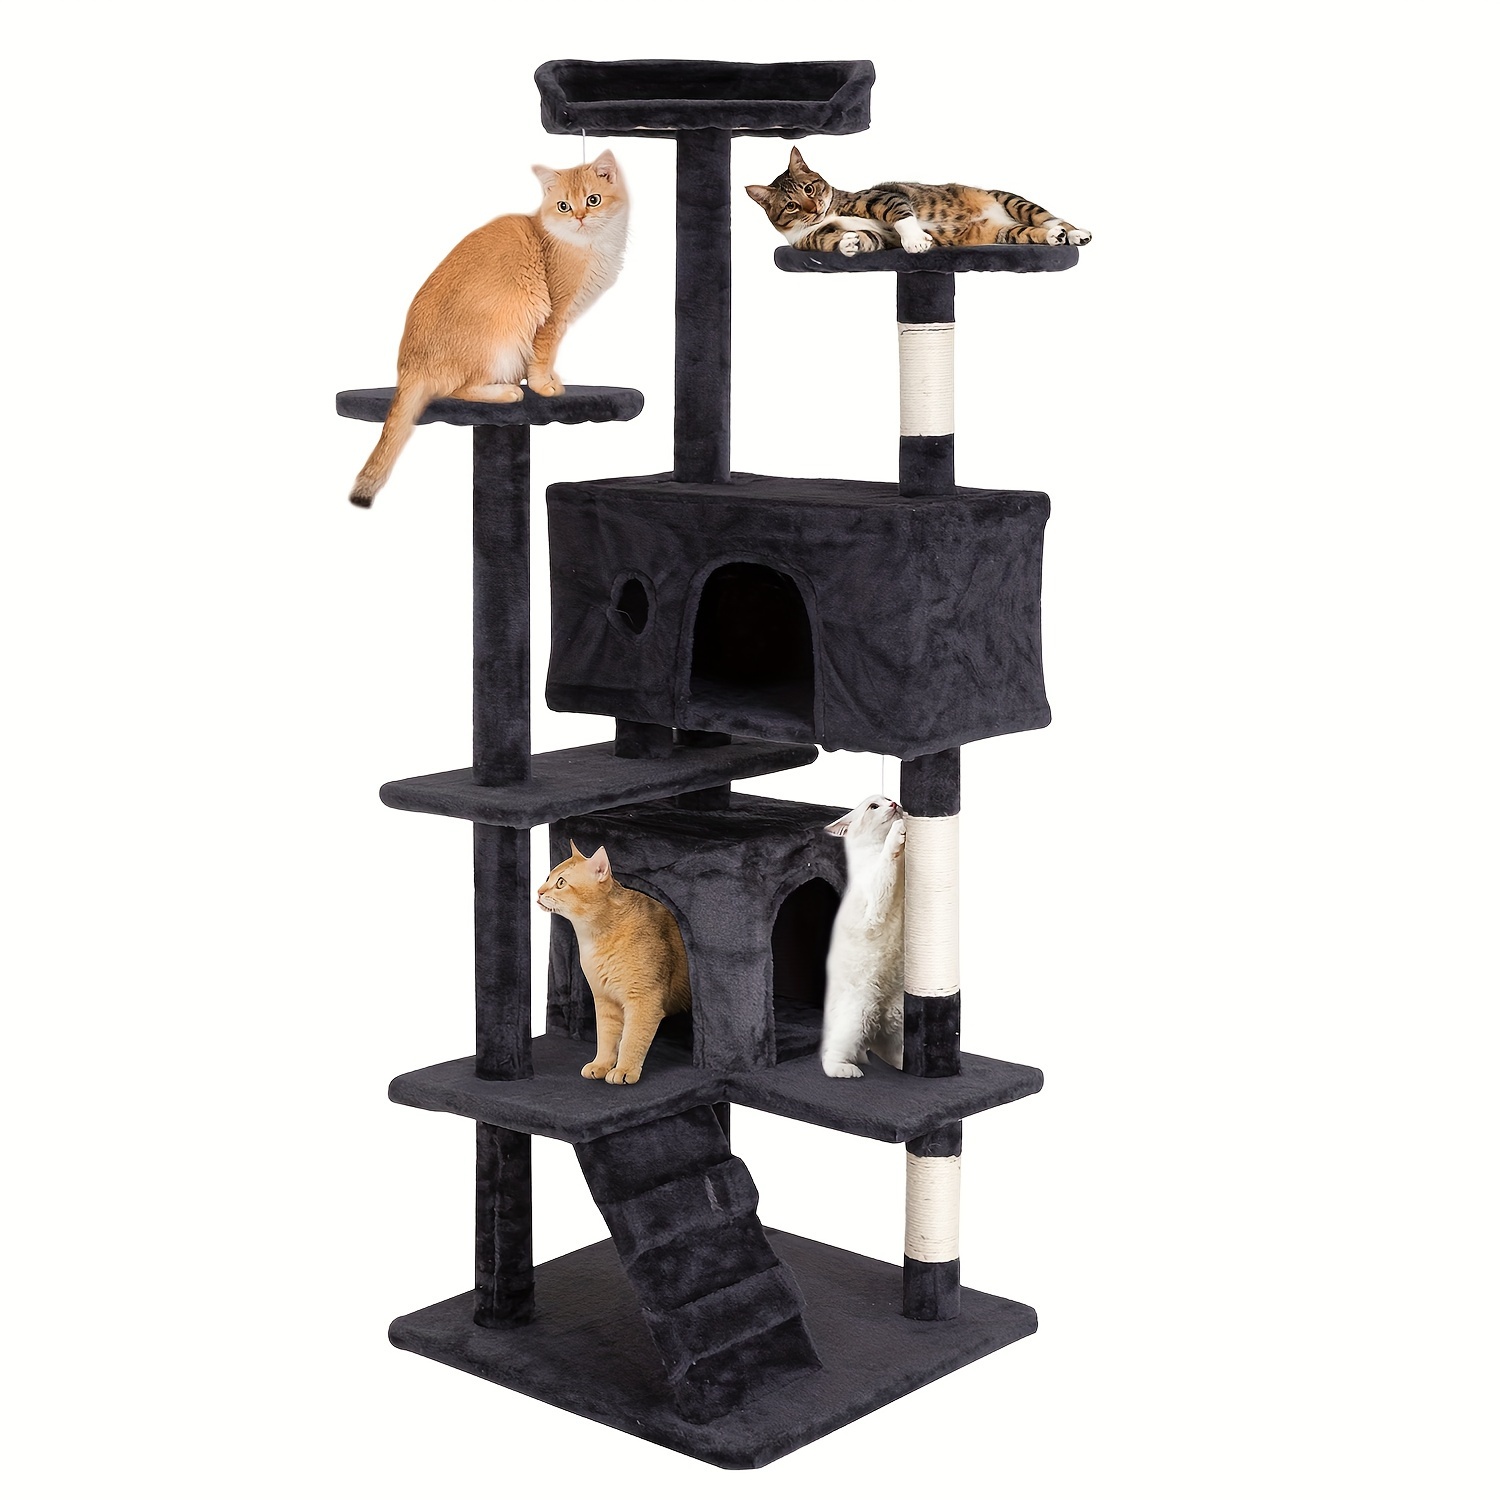 

Dopinmin 54in Cat Tree Tower For Indoor Cats, Multi-level Furniture Activity Center With Scratching Posts Stand House Condo Funny Toys Kittens House, Dark Gray